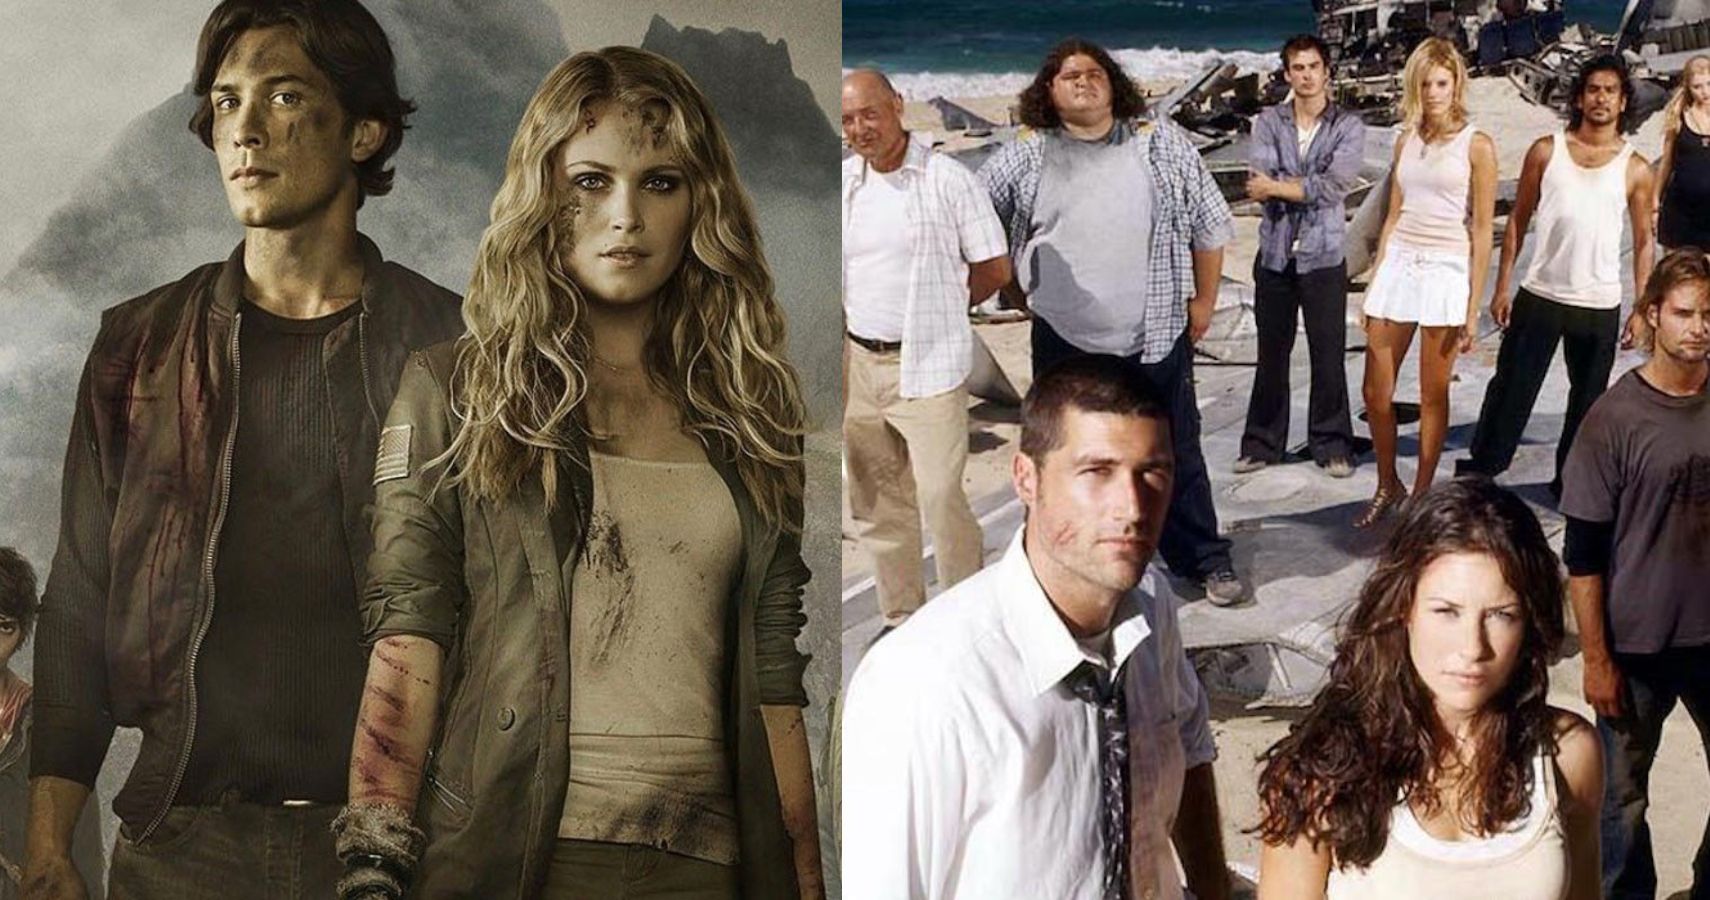 15 Shows To Watch If You Like The 100